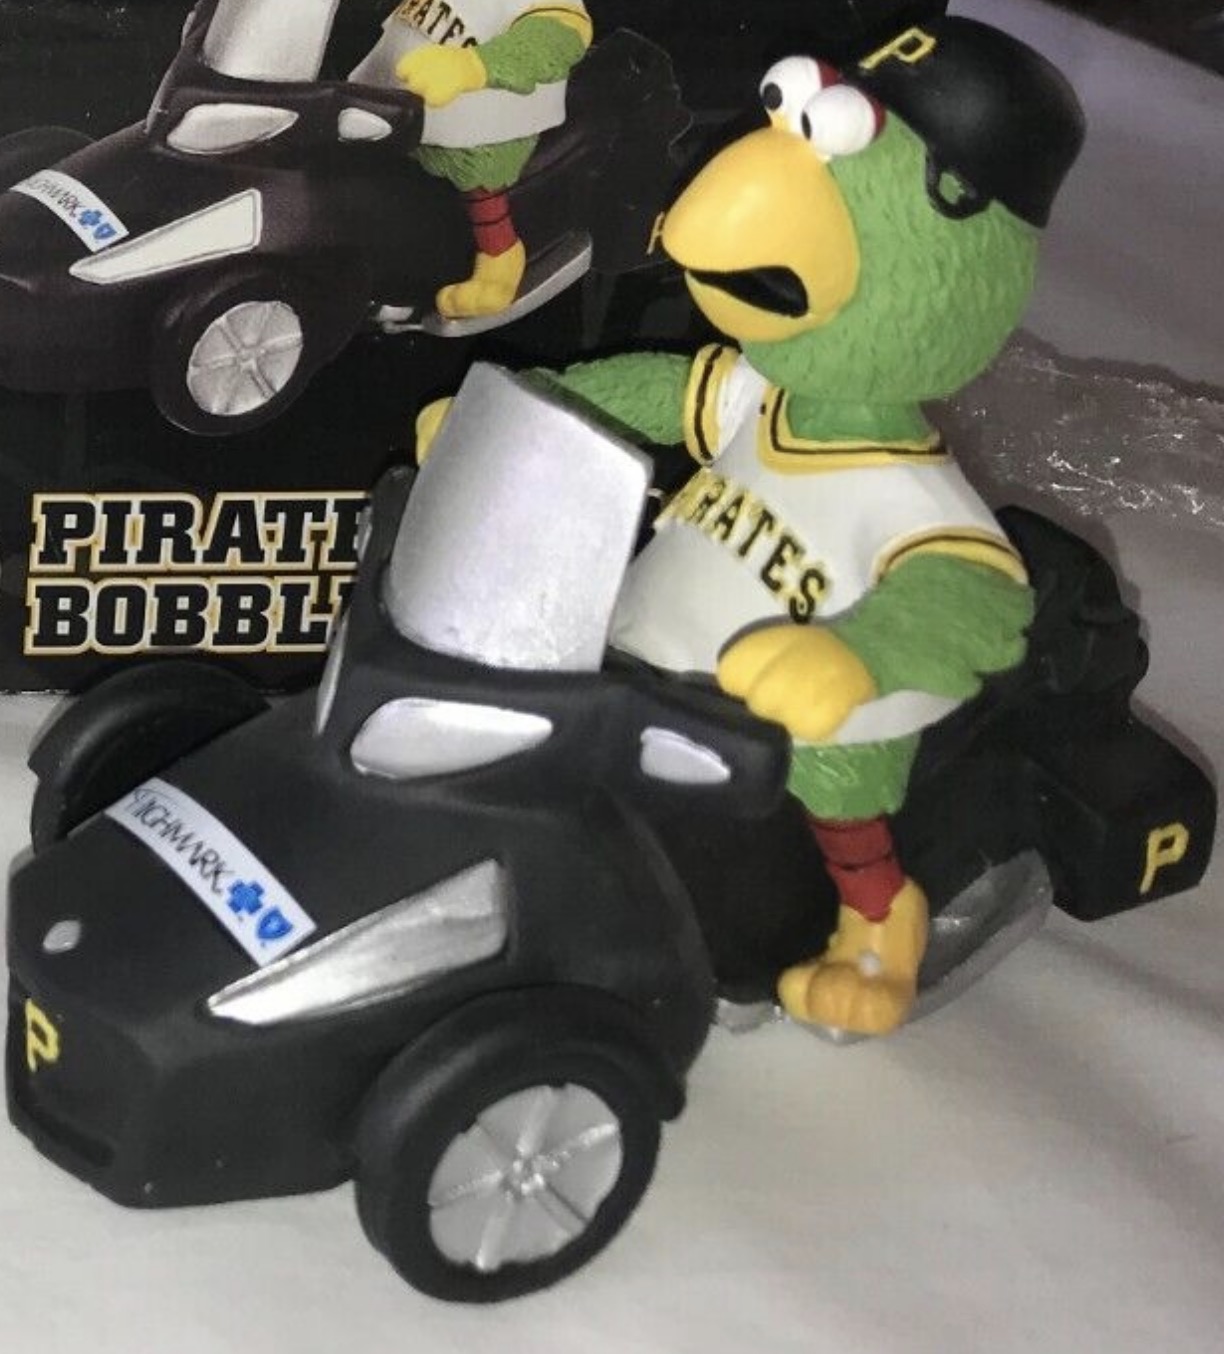 The Pirate Parrot bobblehead